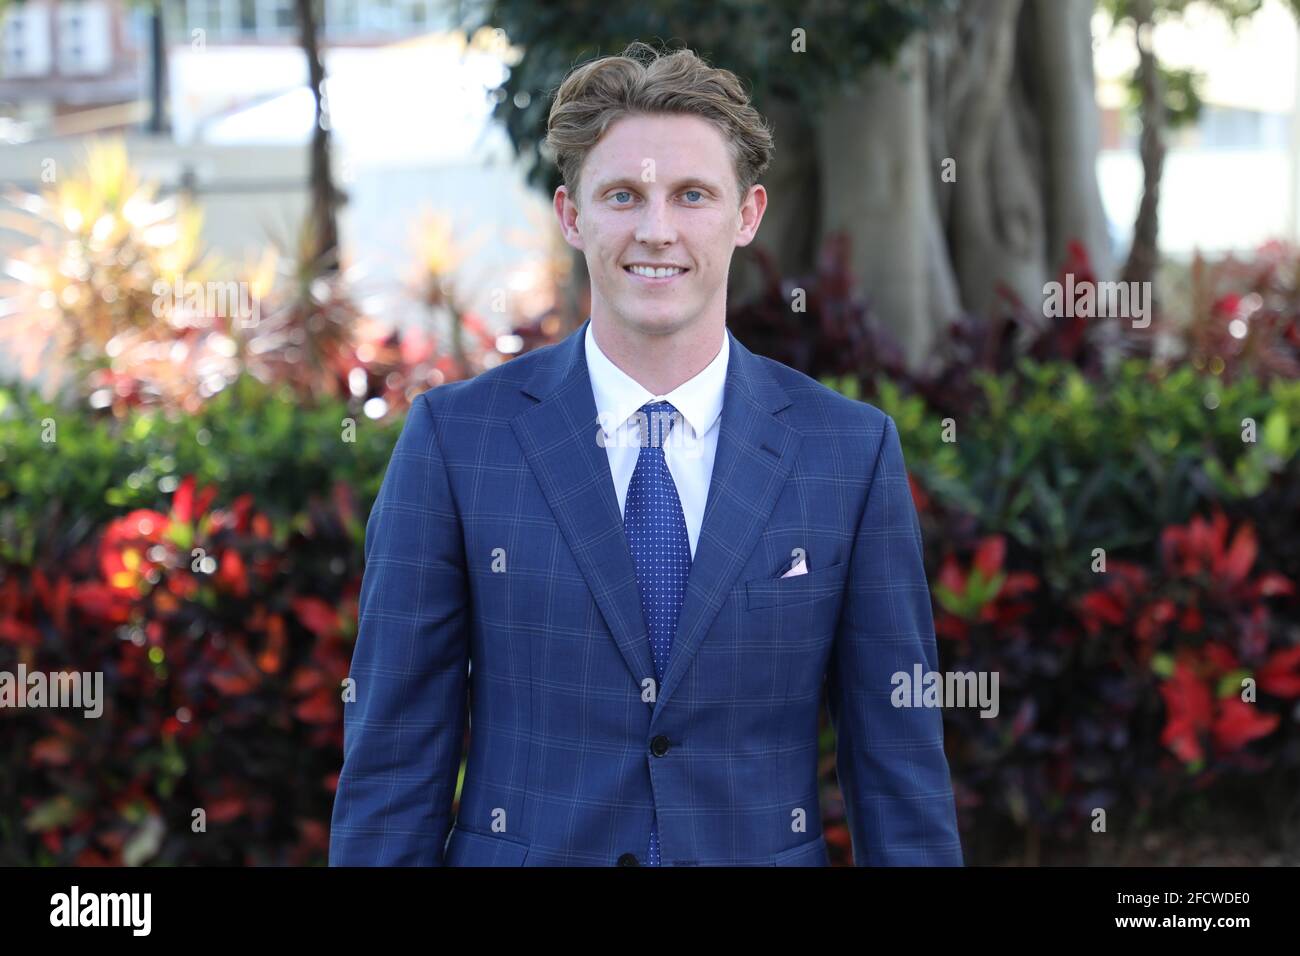 Sydney, Australia. 24 aprile 2021. Lachie Whitfield, GWS Giants AFL Player partecipa all'evento finale del Sydney Autumn Racing Carnival - Schweppes All Aged Stakes Day all'ippodromo Royal Randwick. Credit: Richard Milnes/Alamy Live News Foto Stock